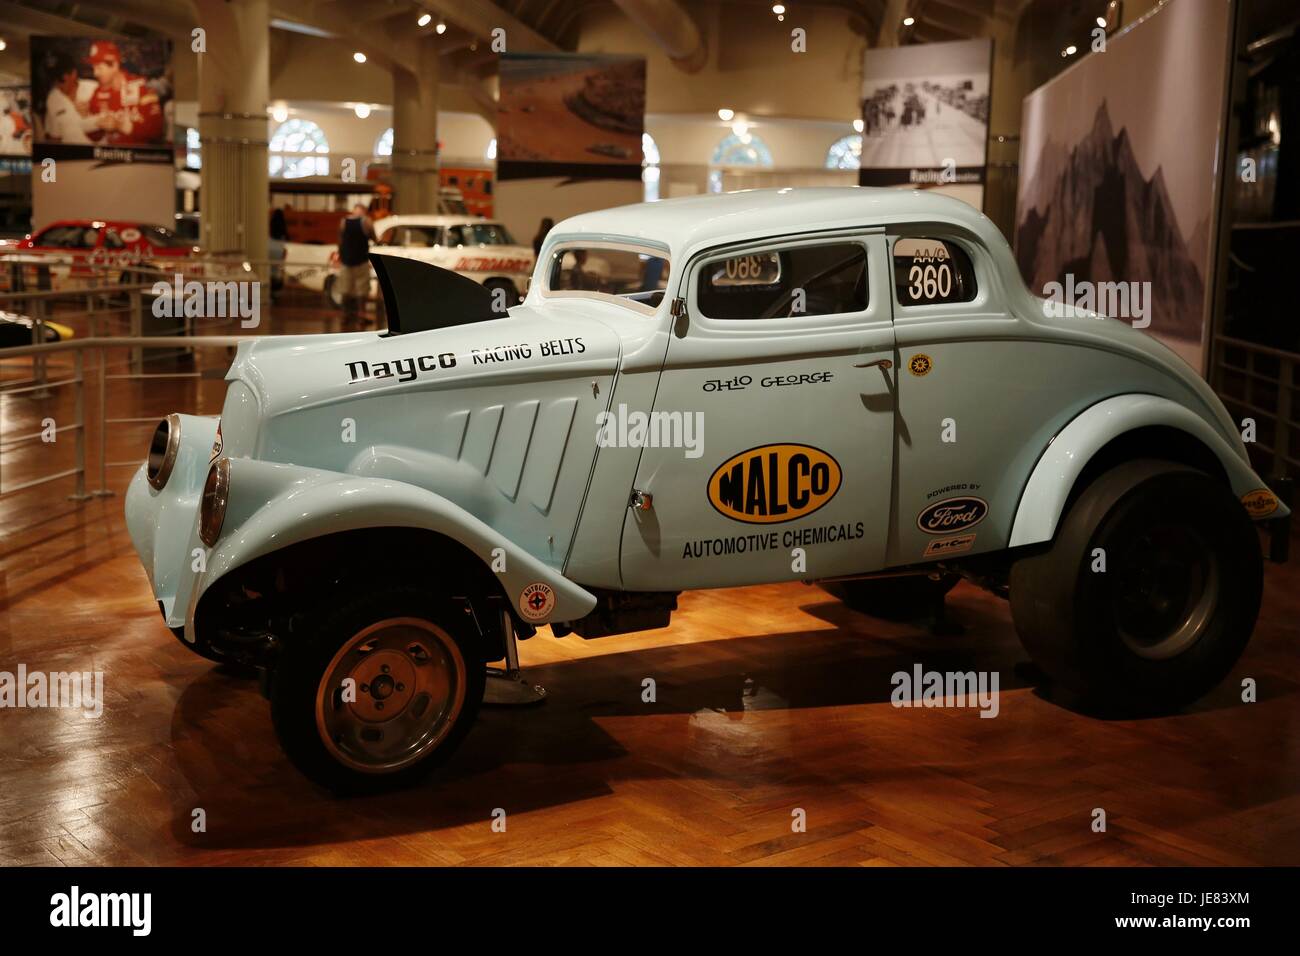 Detroit. 22nd June, 2017. Photo taken on June 22, 2017 shows a '1967 Ford Mark IV' sports car displayed at the Henry Ford Museum of American Innovation, in Detroit, the United States. Credit: Wang Ping/Xinhua/Alamy Live News Stock Photo